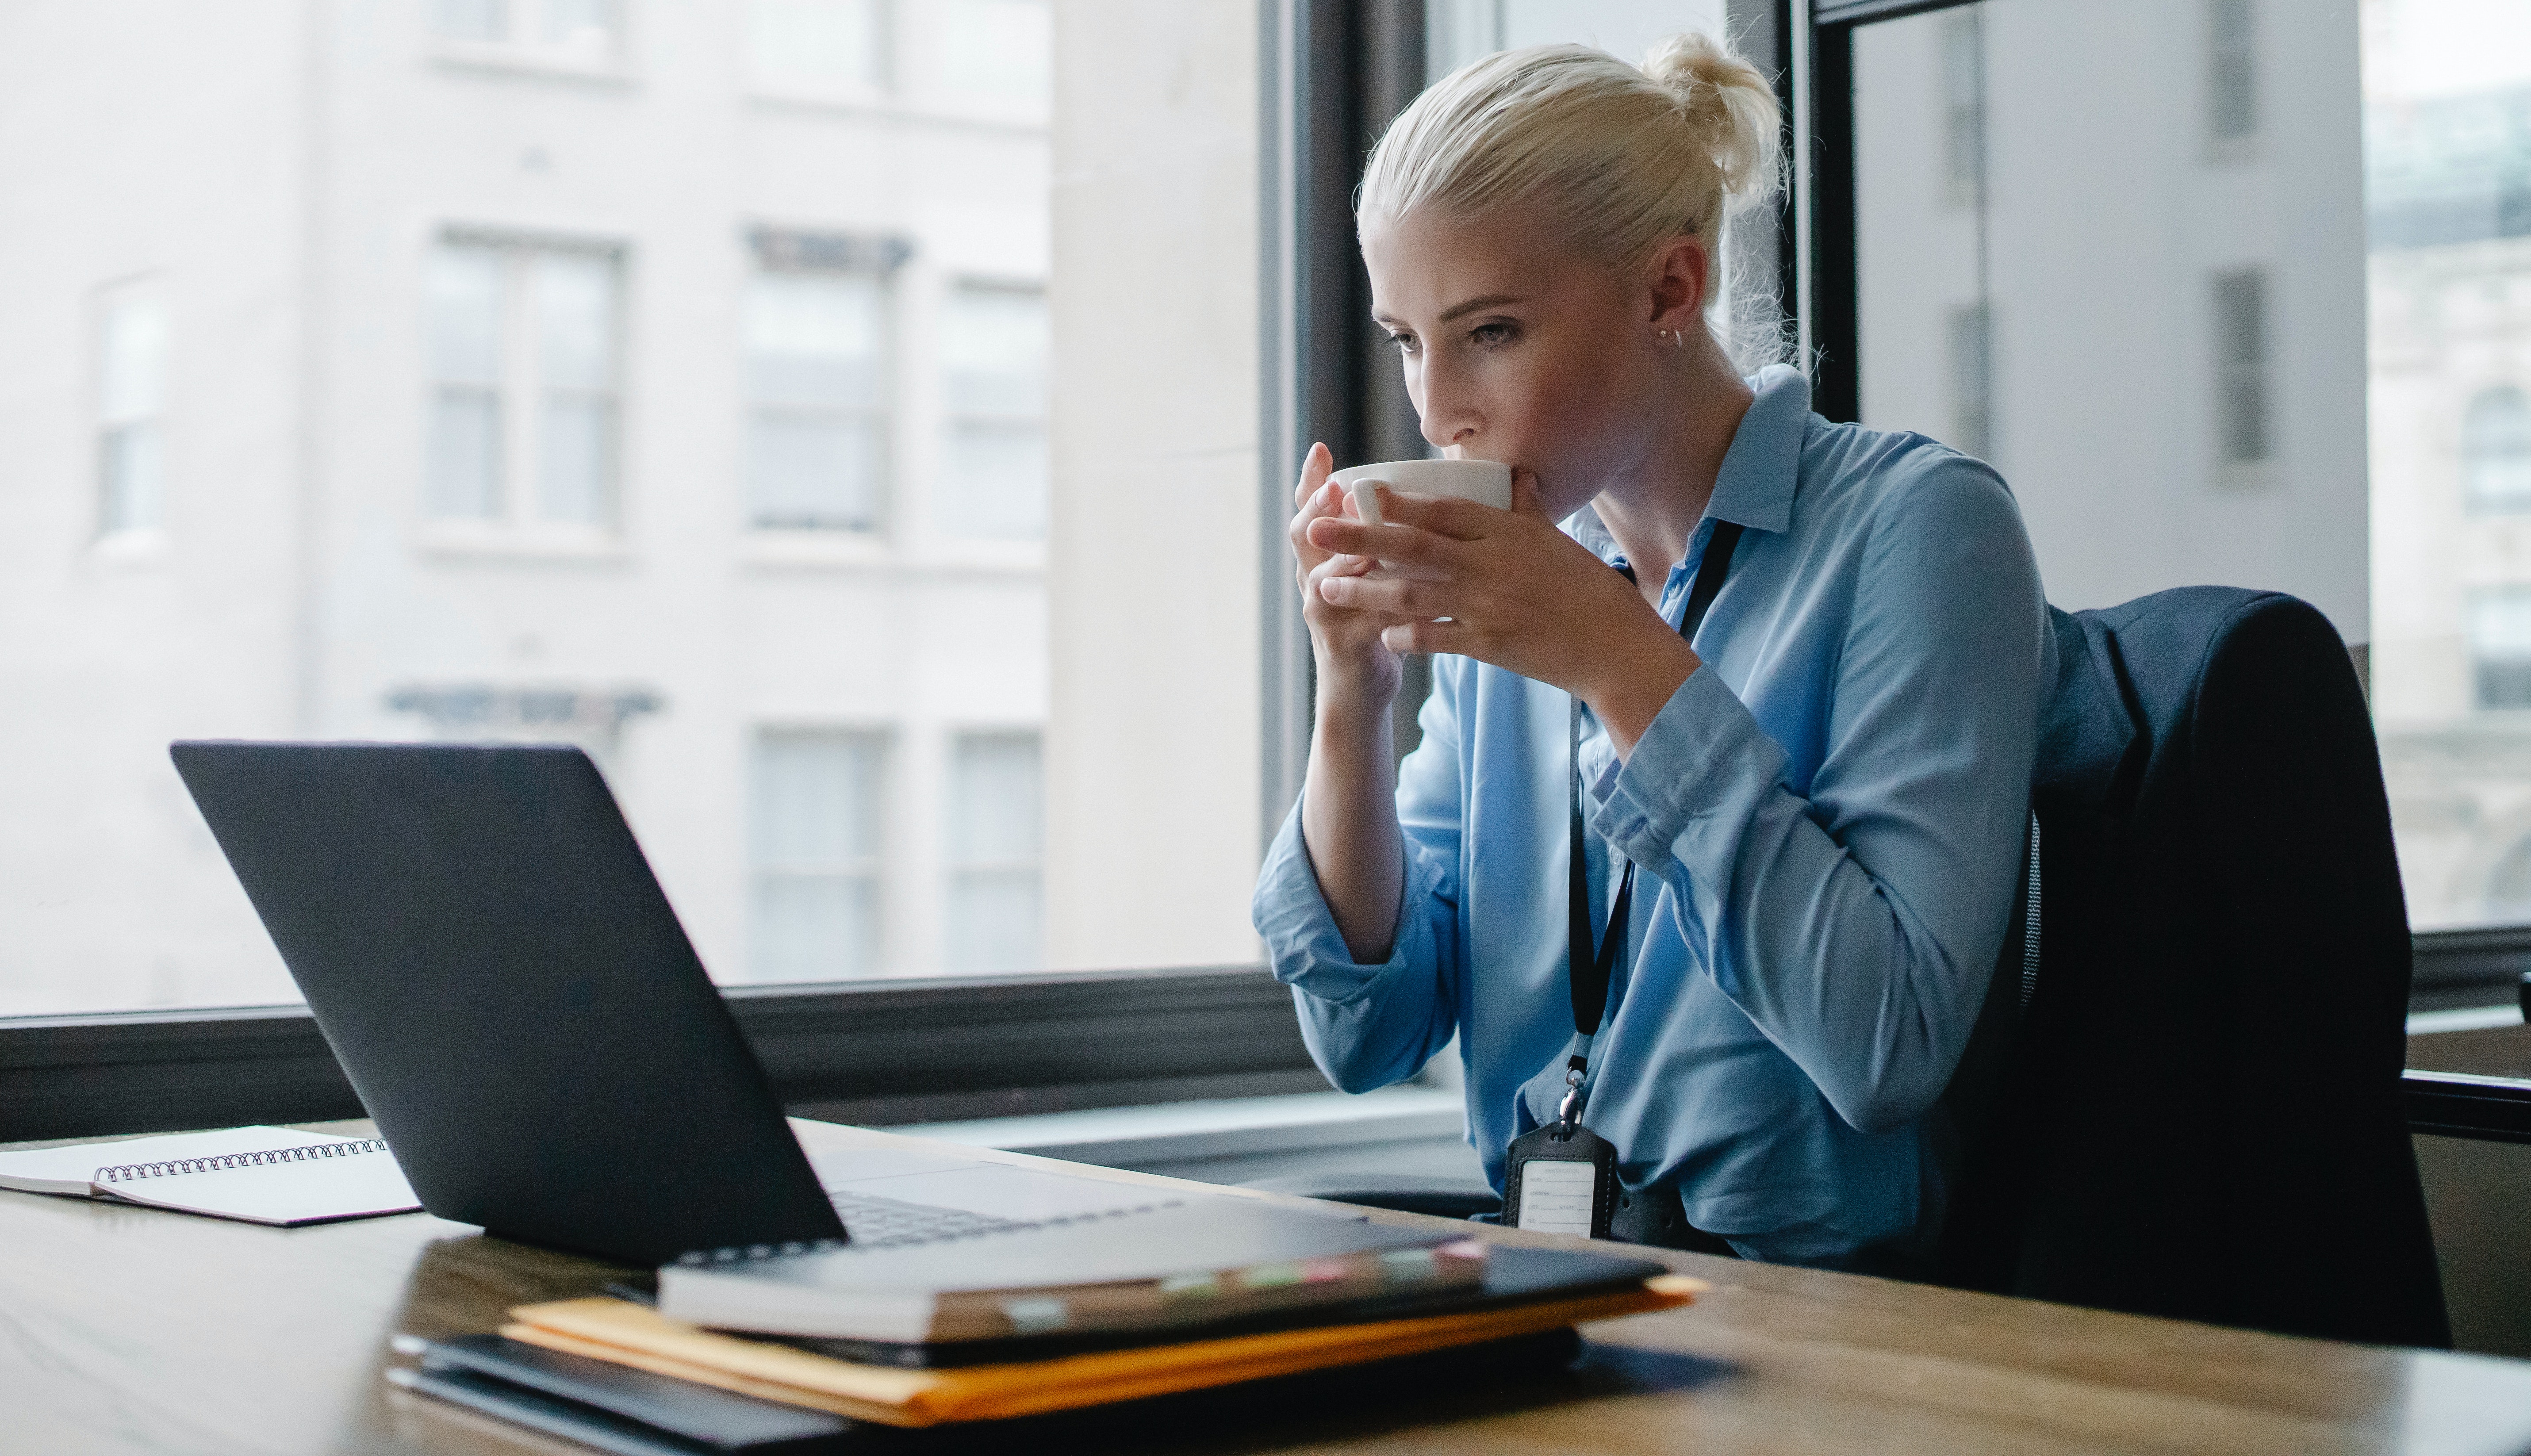 A woman working and sipping on coffee. | Source: Pexels